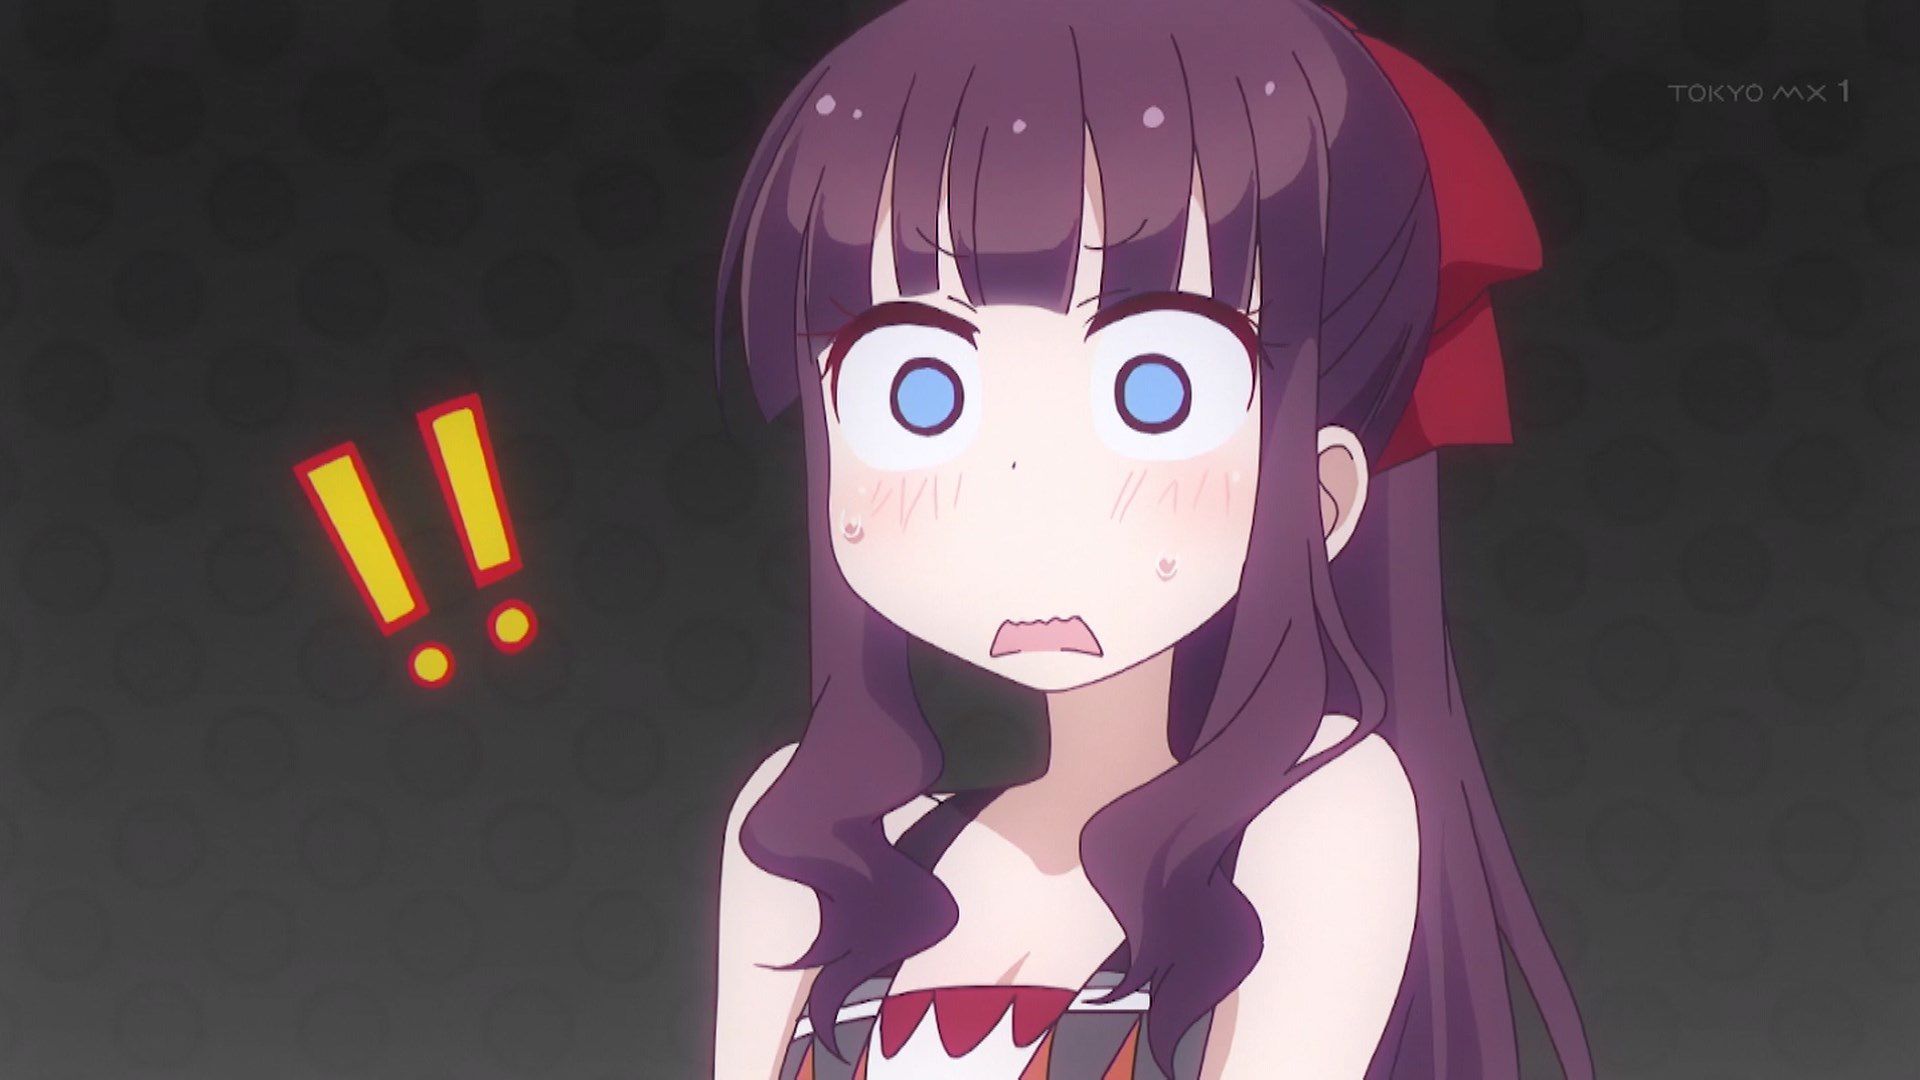 [Artificial mouth times] "NEW GAME! "Of all nine episodes, Yuri hifumi nude too たまらな of wwwwwwwww 5